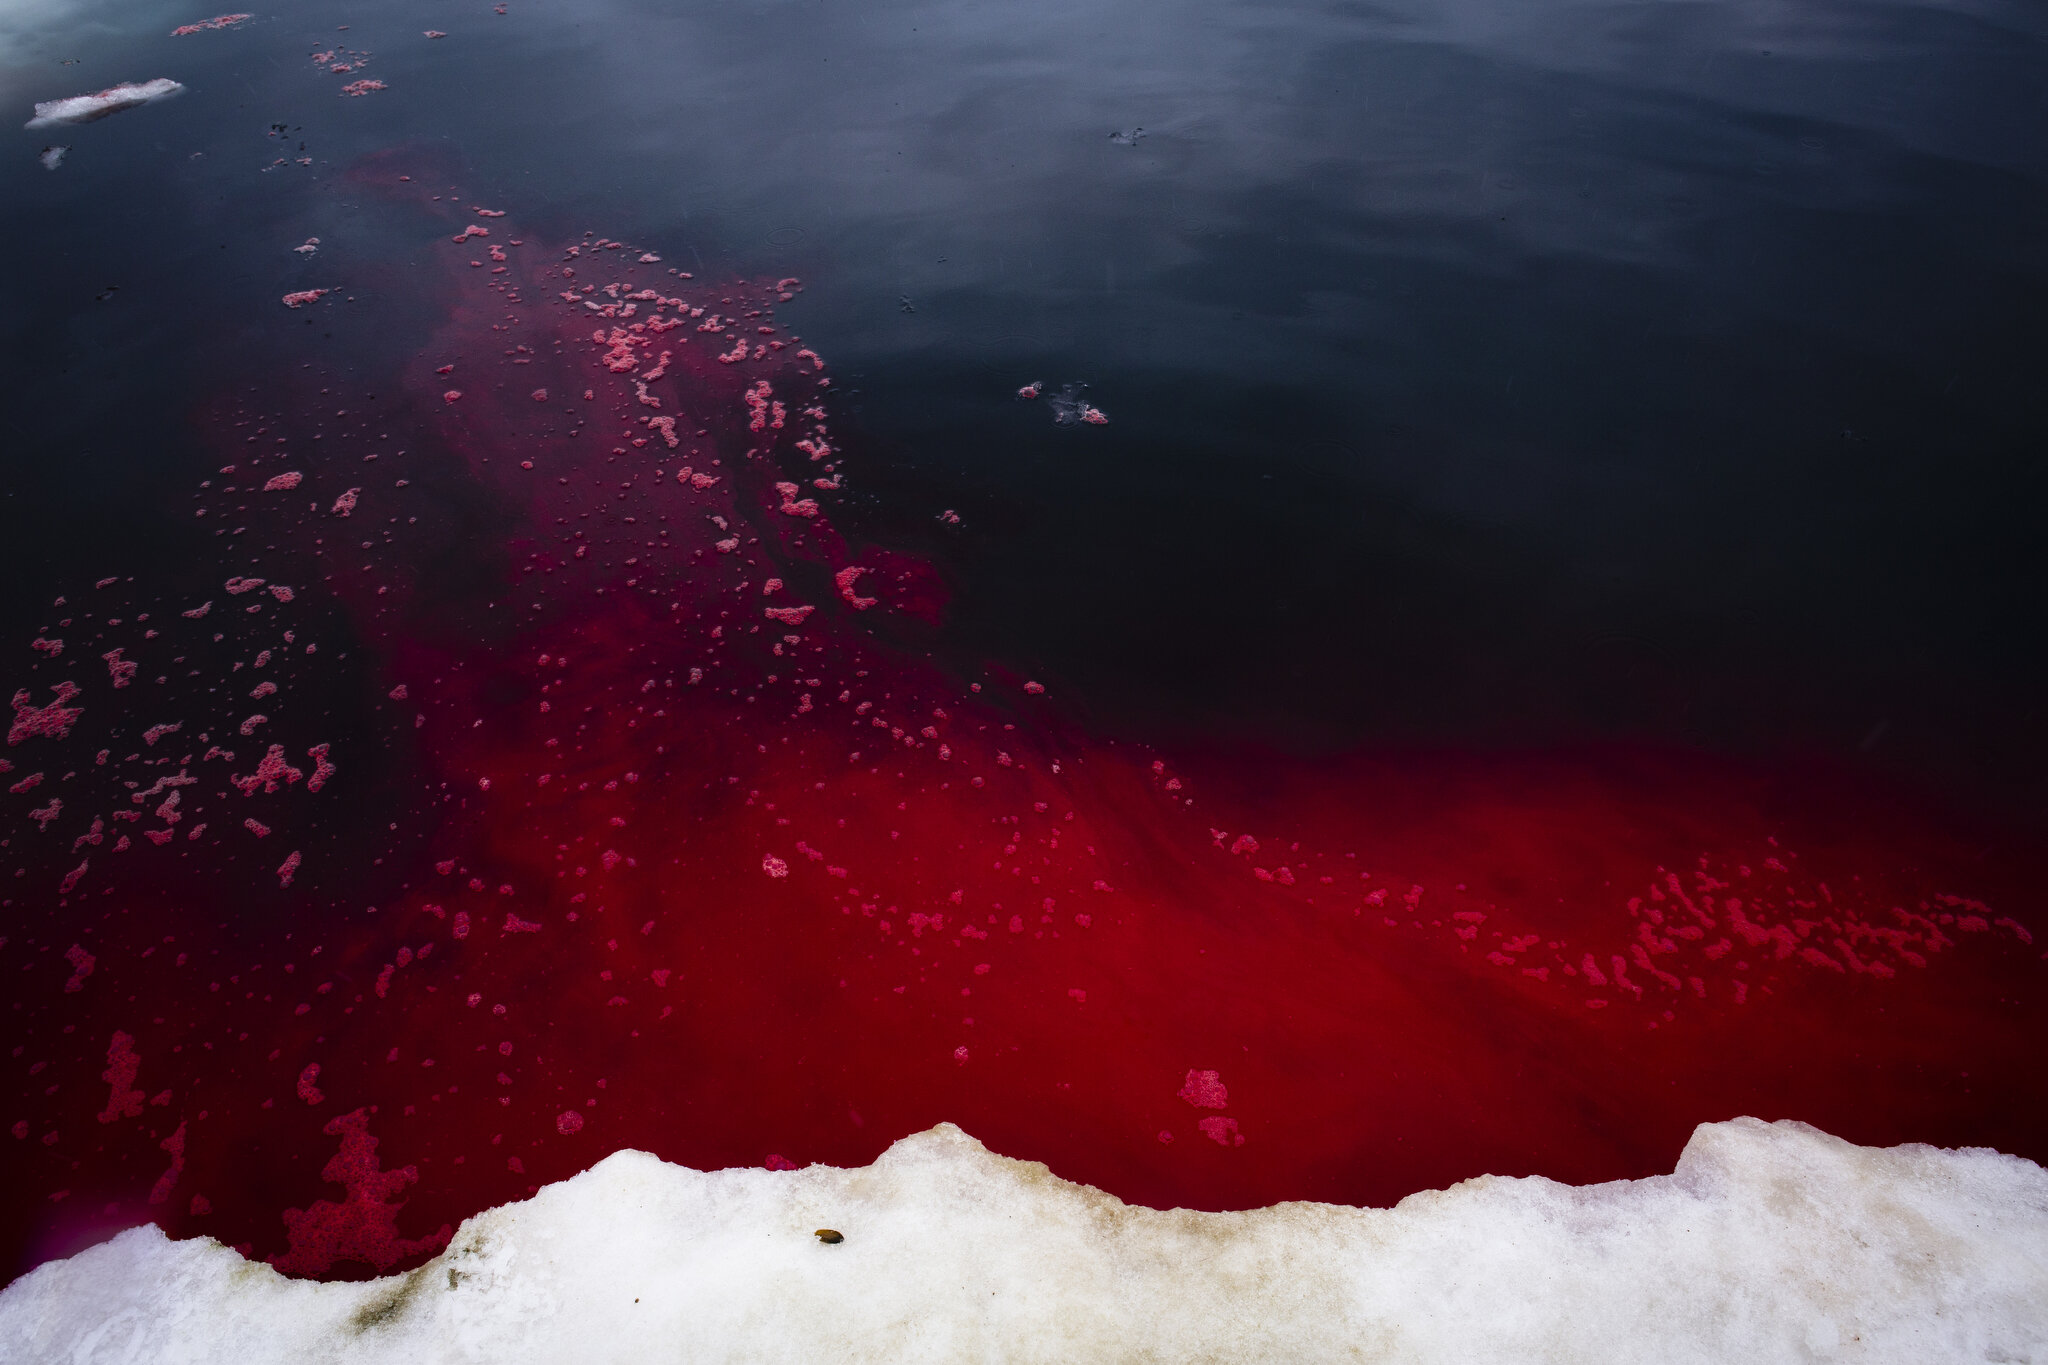  Walrus blood in the Arctic Ocean after an Inupiat family hunts a walrus on the sea ice near Utqiagvik, Alaska (formerly known as Barrow). June 25th, 2015. Hunting affects all aspects of life in Barrow, and is an important food source for this commun